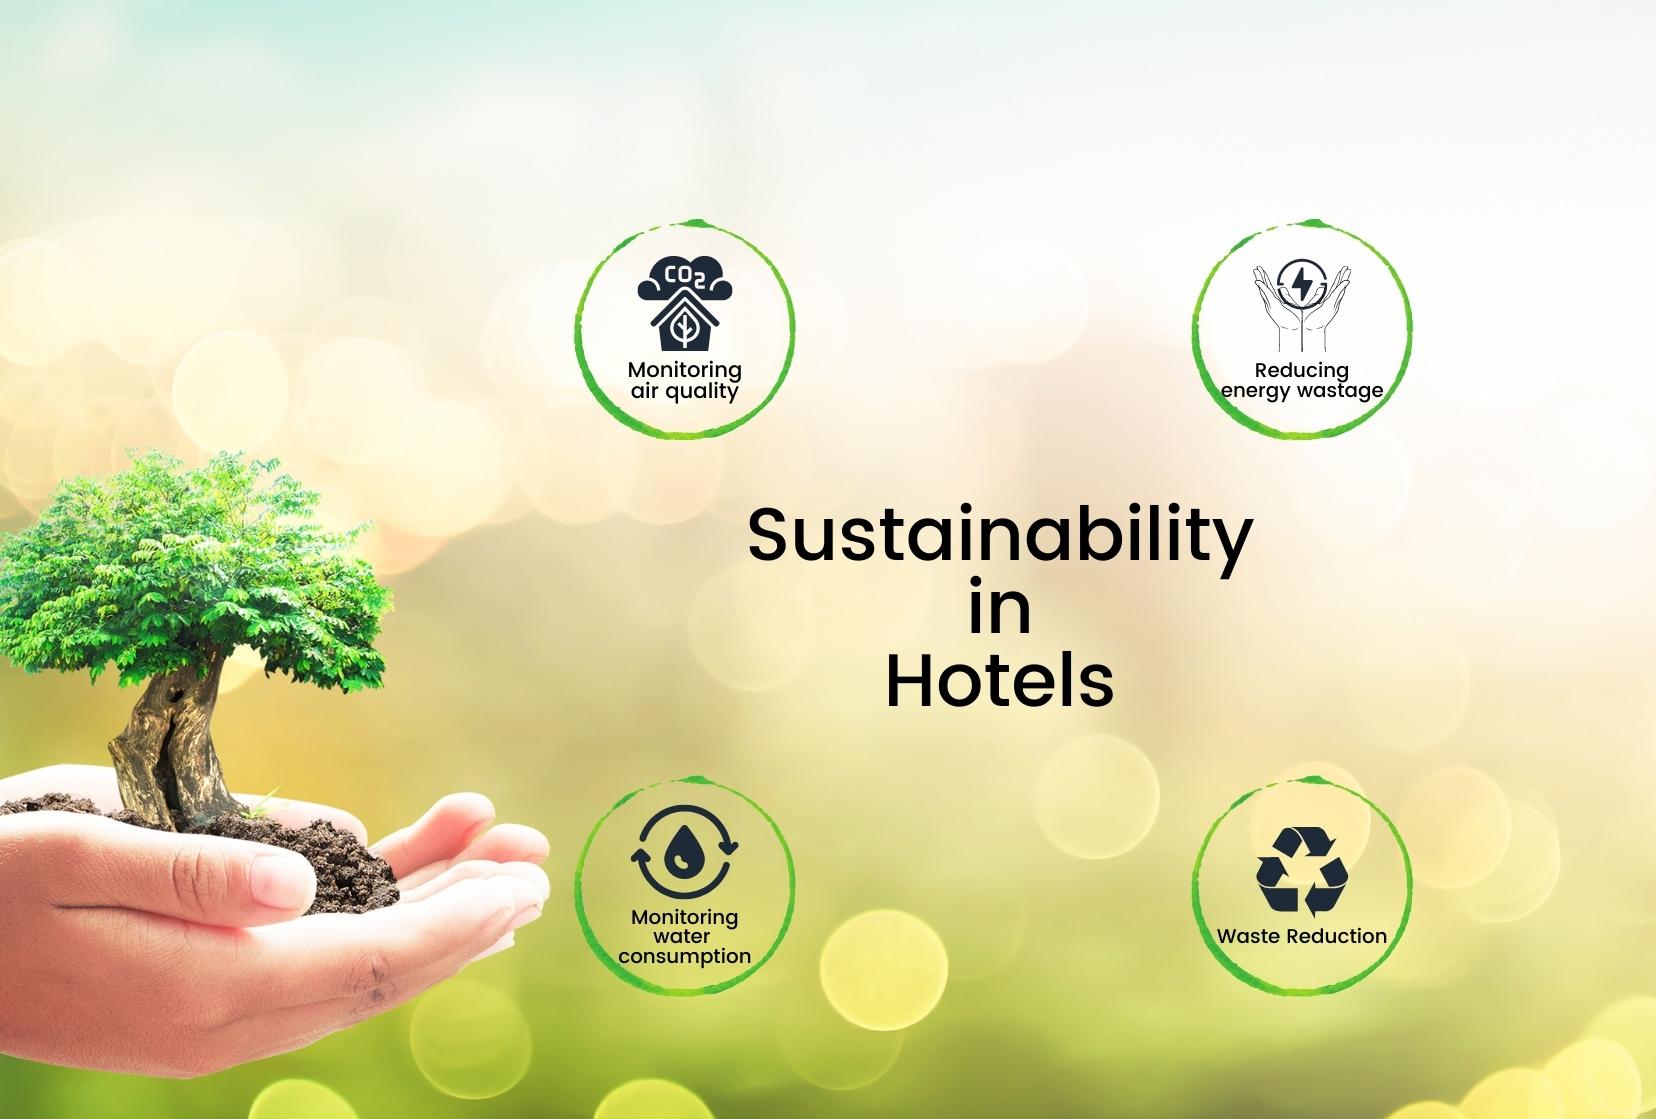 Sustainability in hotels